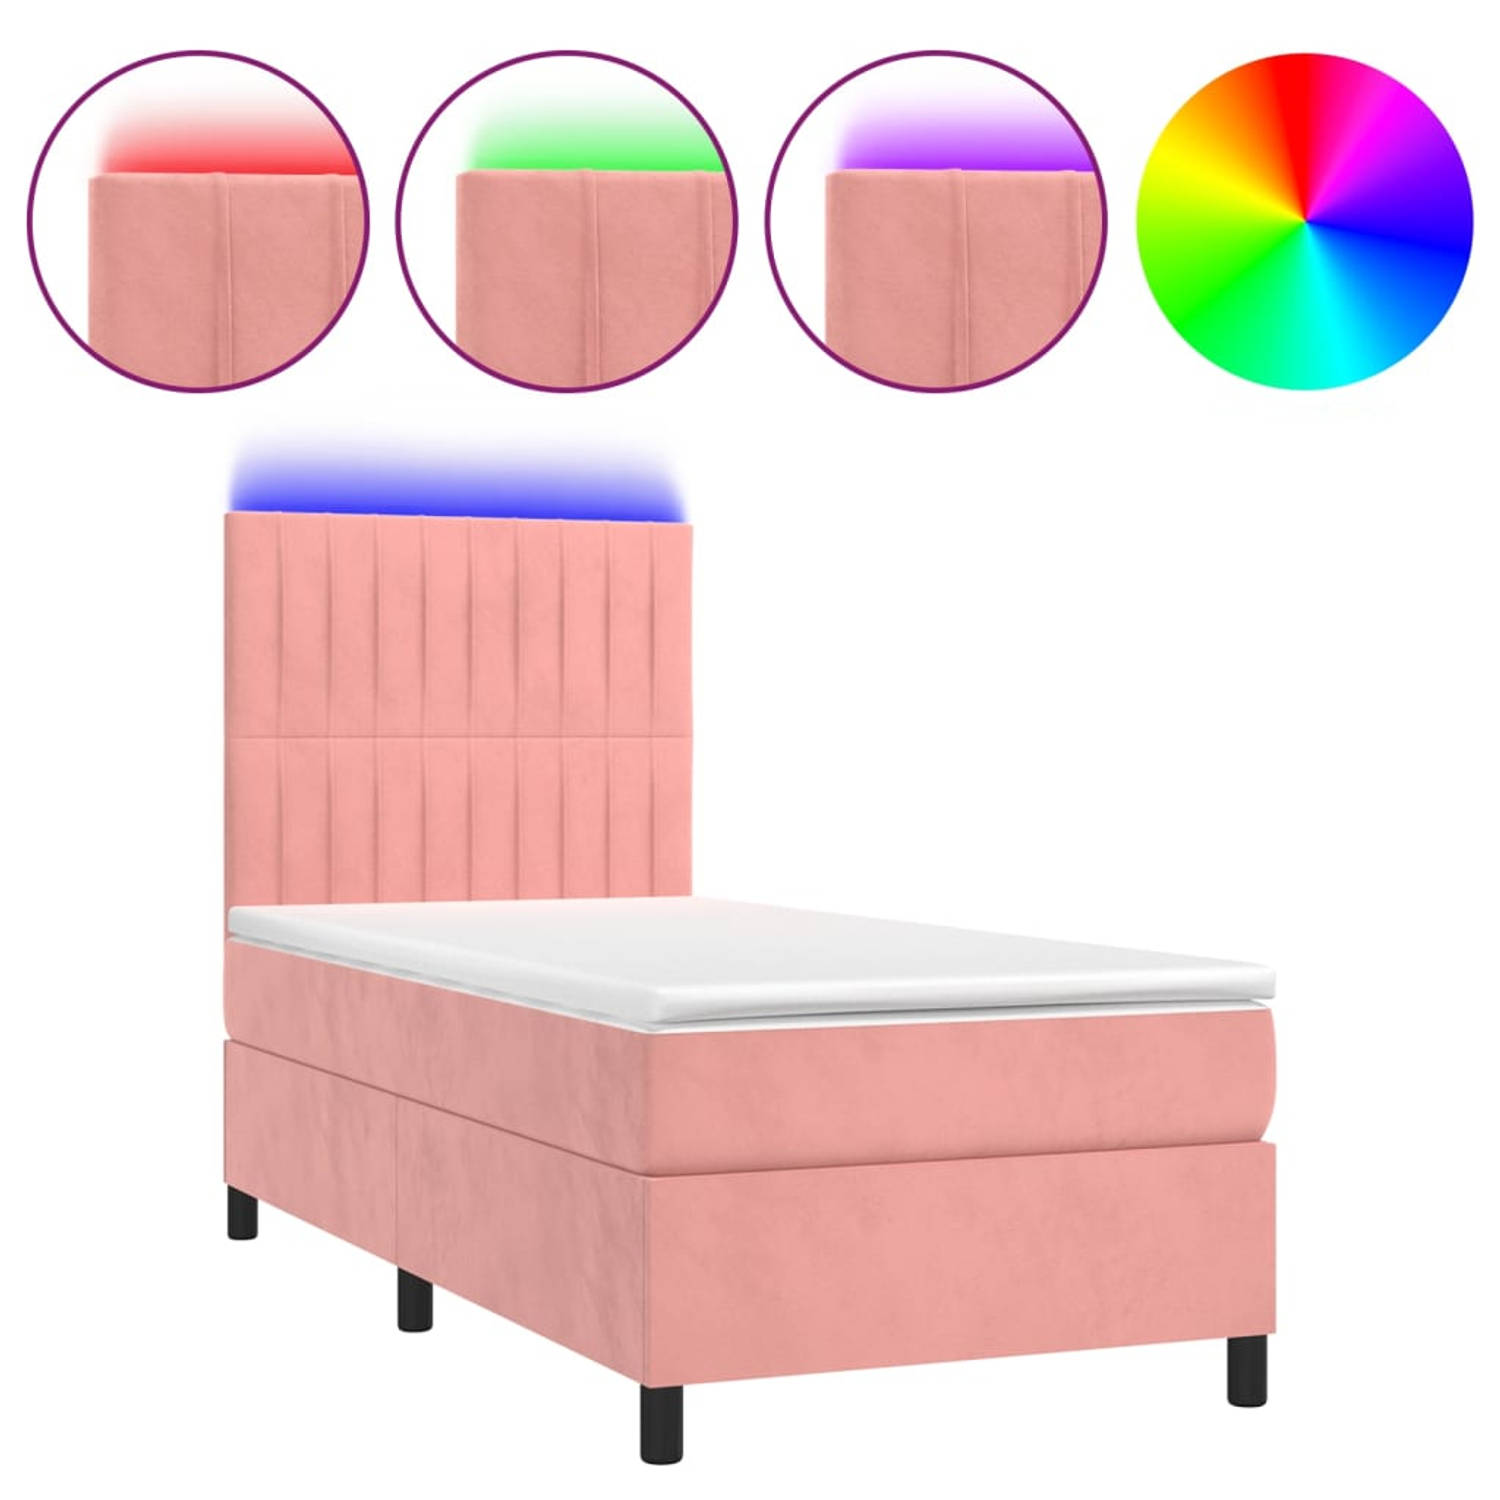 The Living Store Boxspring The Living Store - Fluweel - Bed 203 x 100 x 118/128 cm - Roze